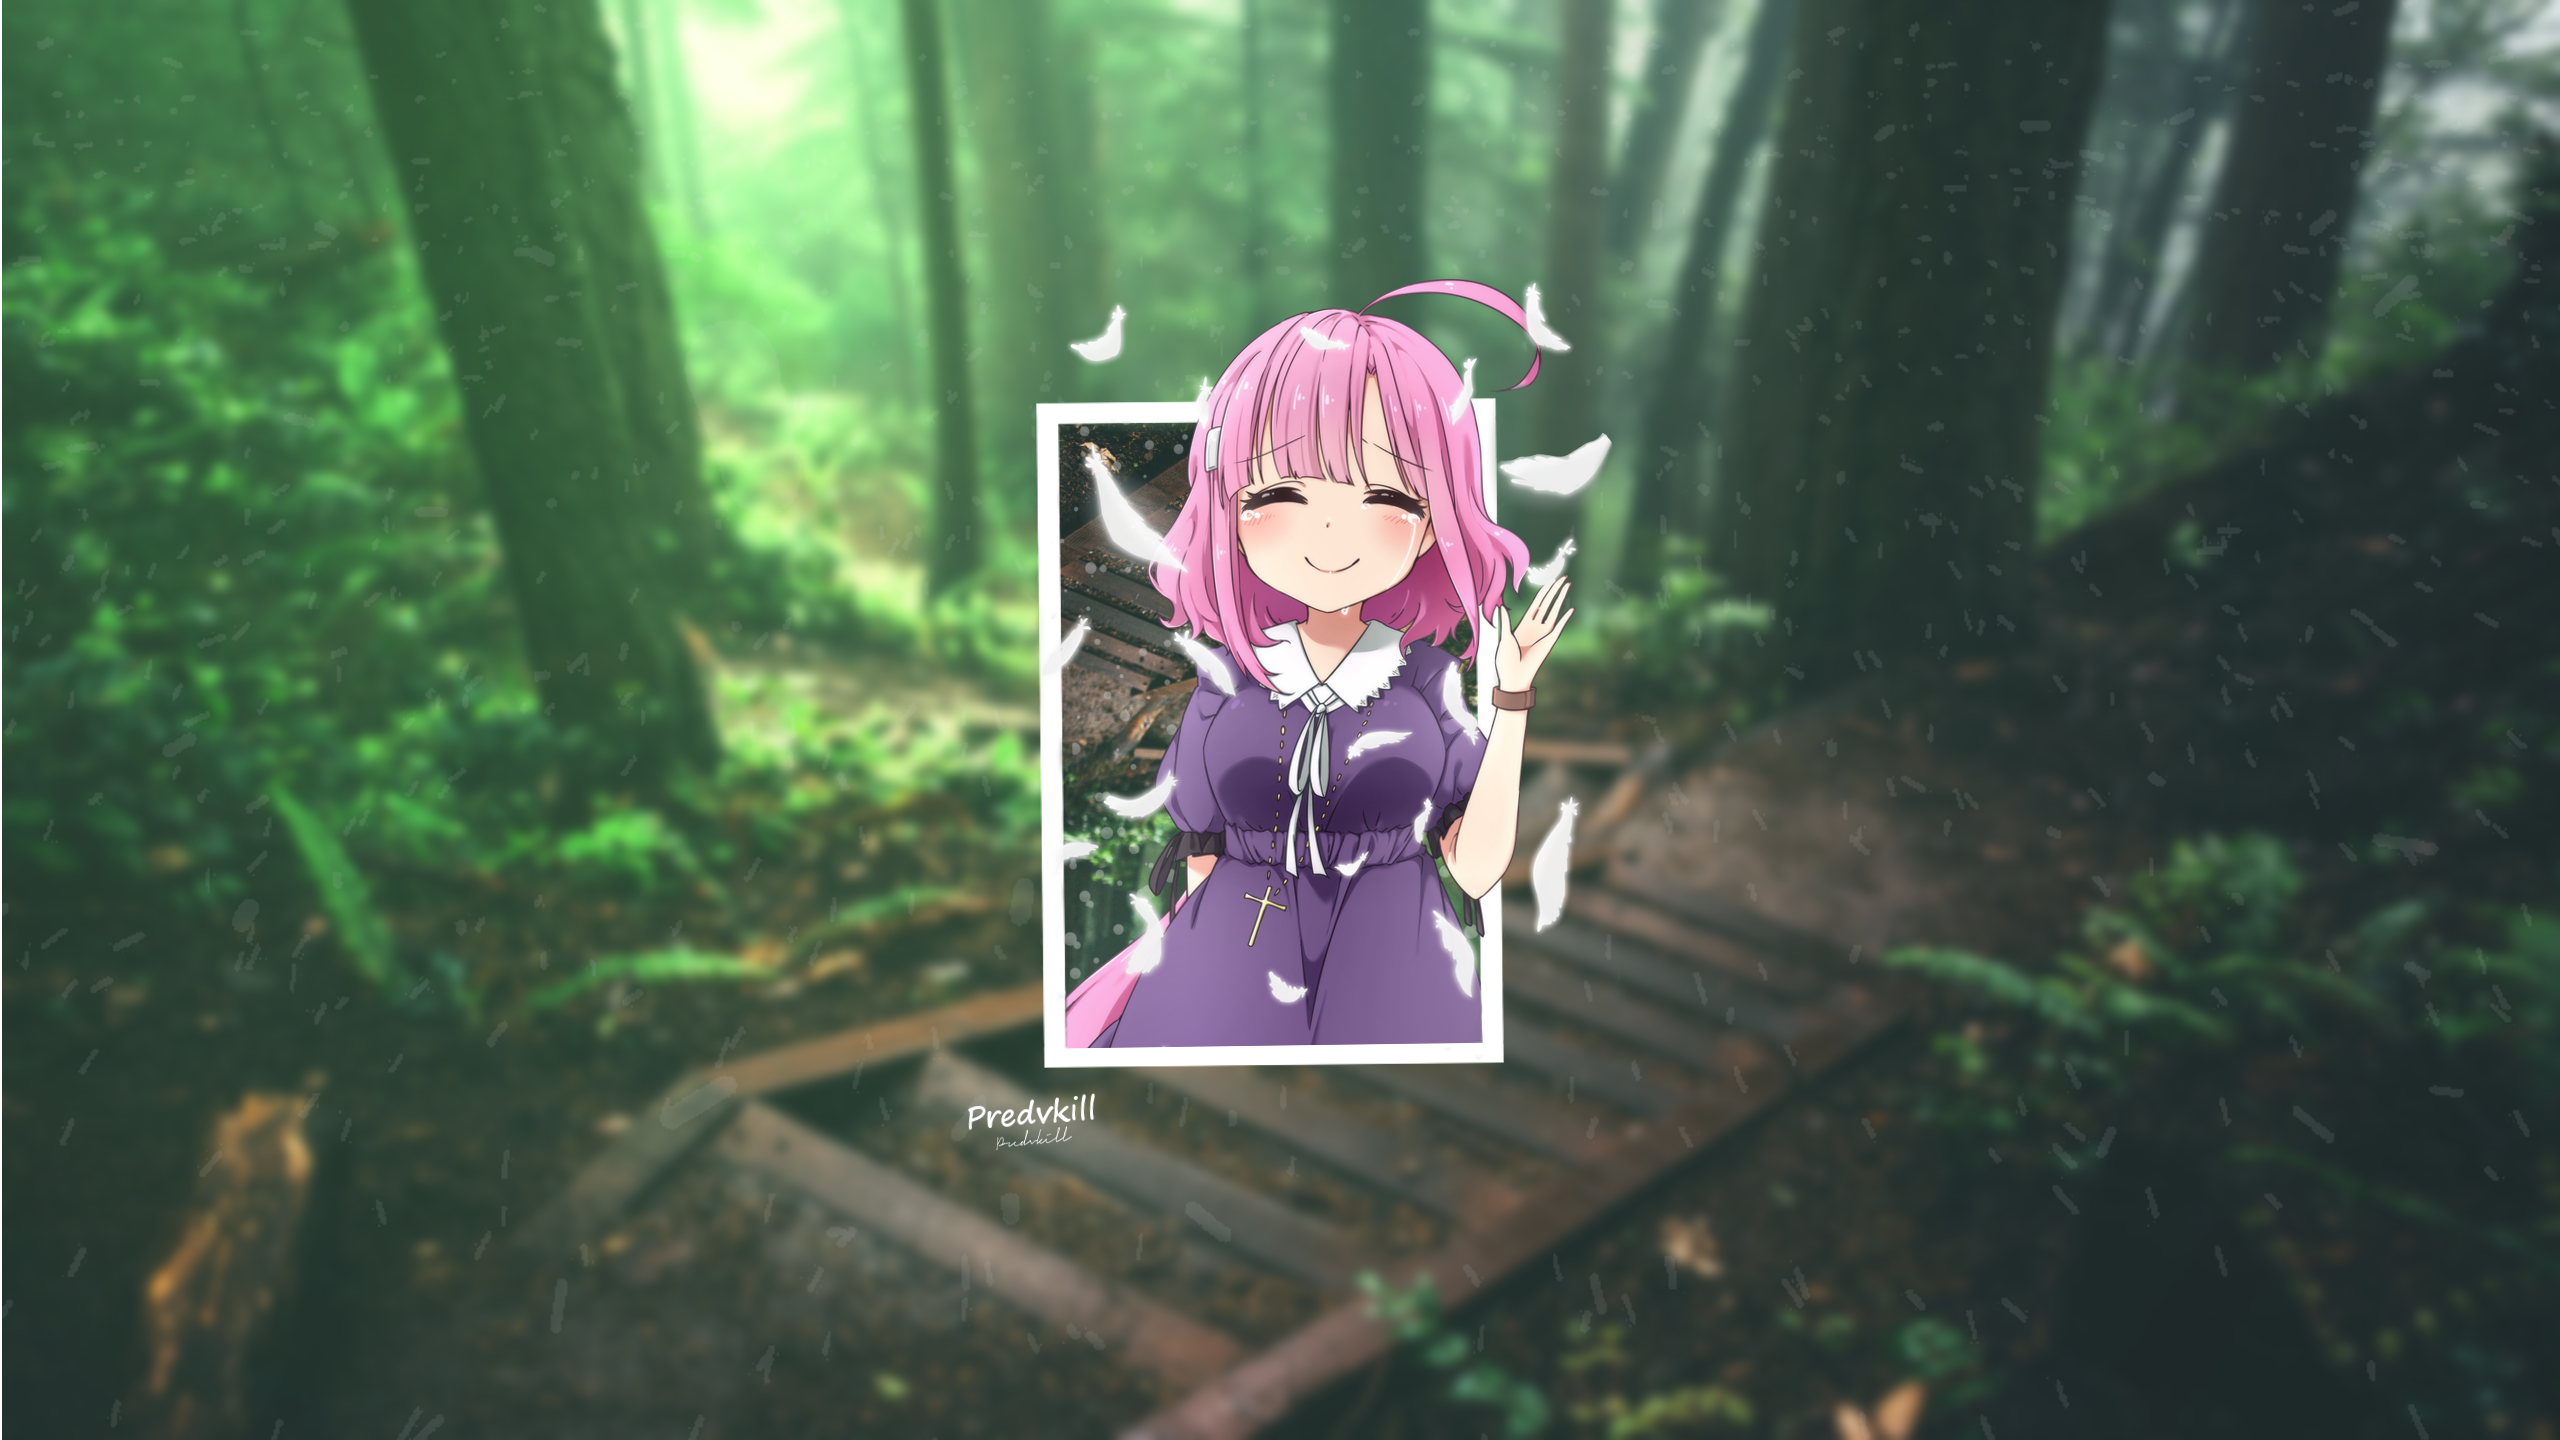 Anime 2560x1440 anime girls anime smiling pink hair forest